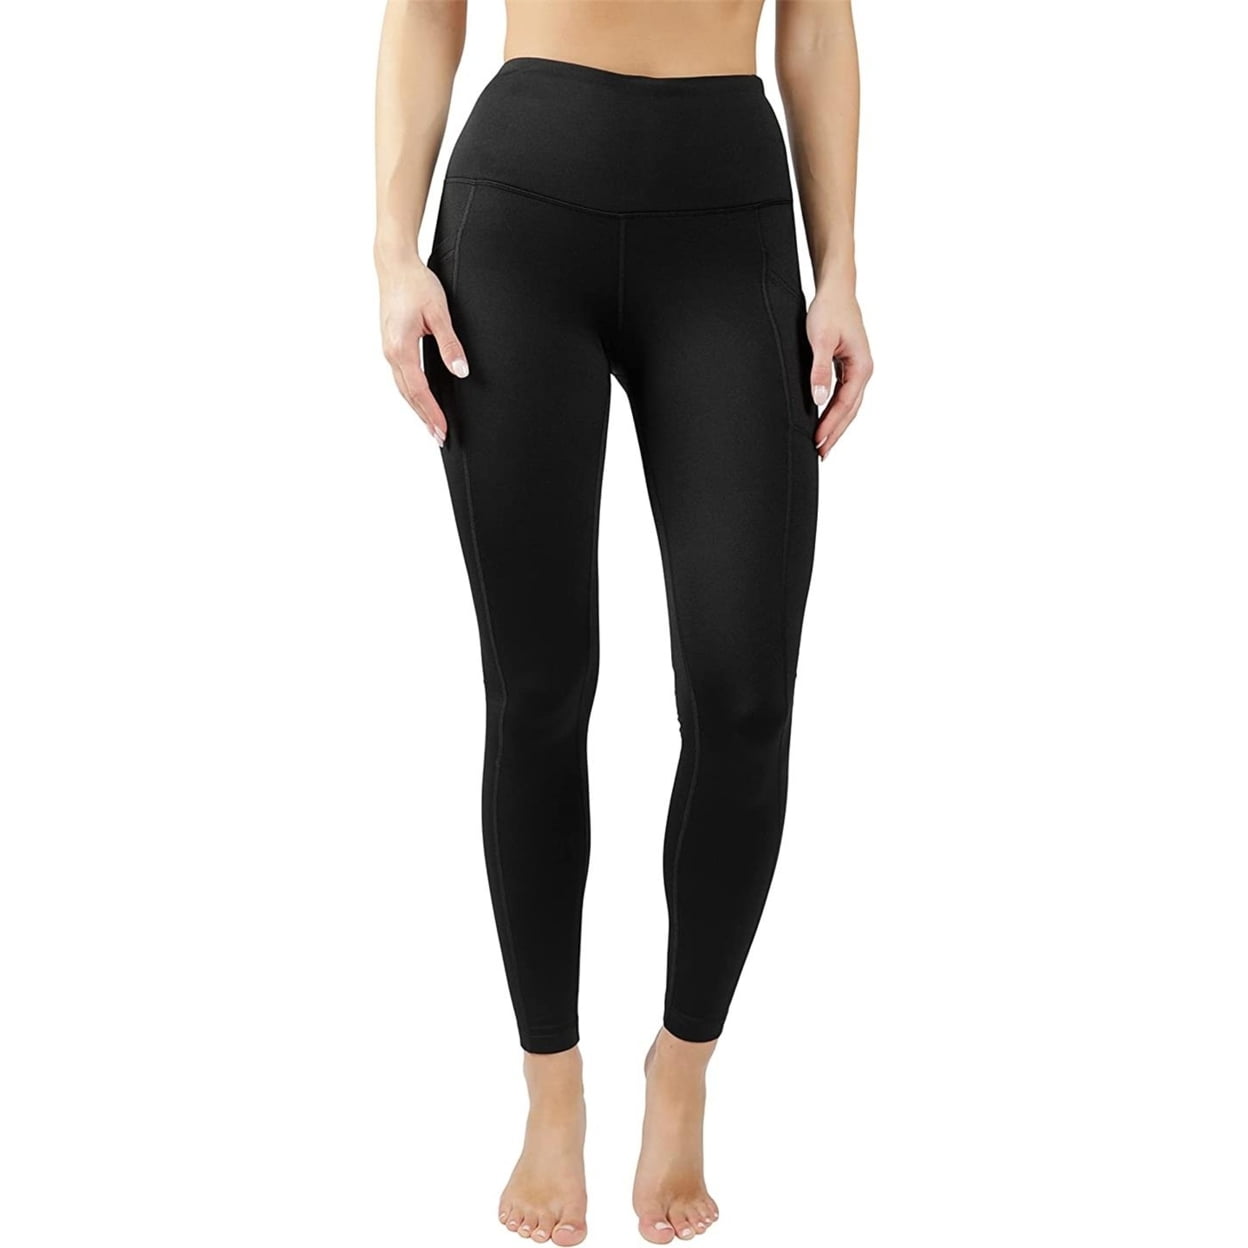 90 Degree By Reflex High Waist Fleece Lined Leggings with Side Pocket -  Yoga Pants - Black with Pocket - Medium New with box/tags 